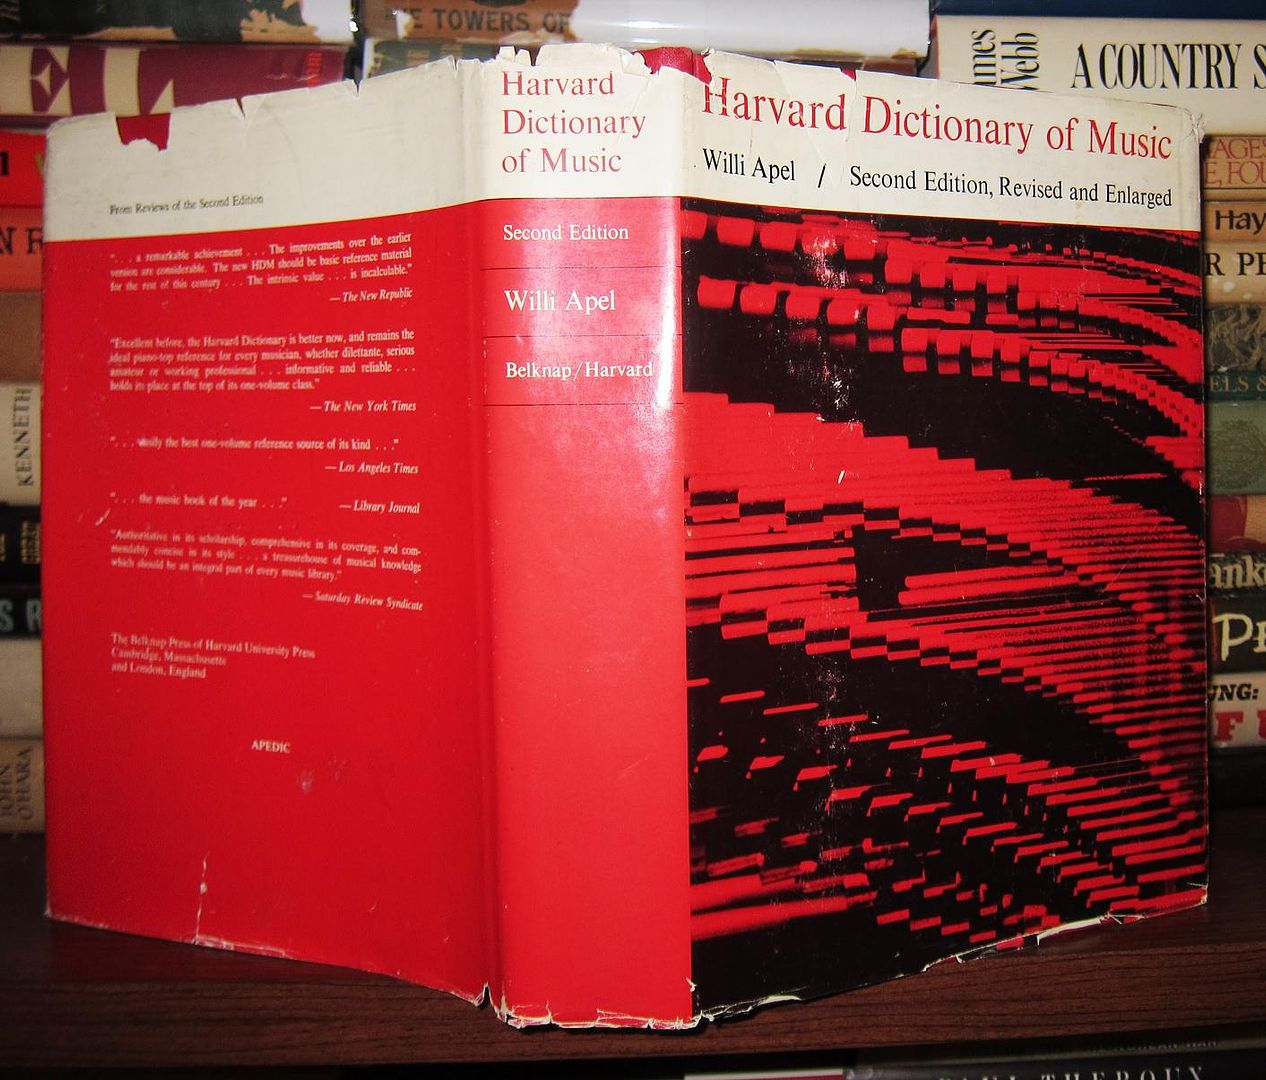 APEL, WILLI - Harvard Dictionary of Music Second Edition, Revised and Enlarged